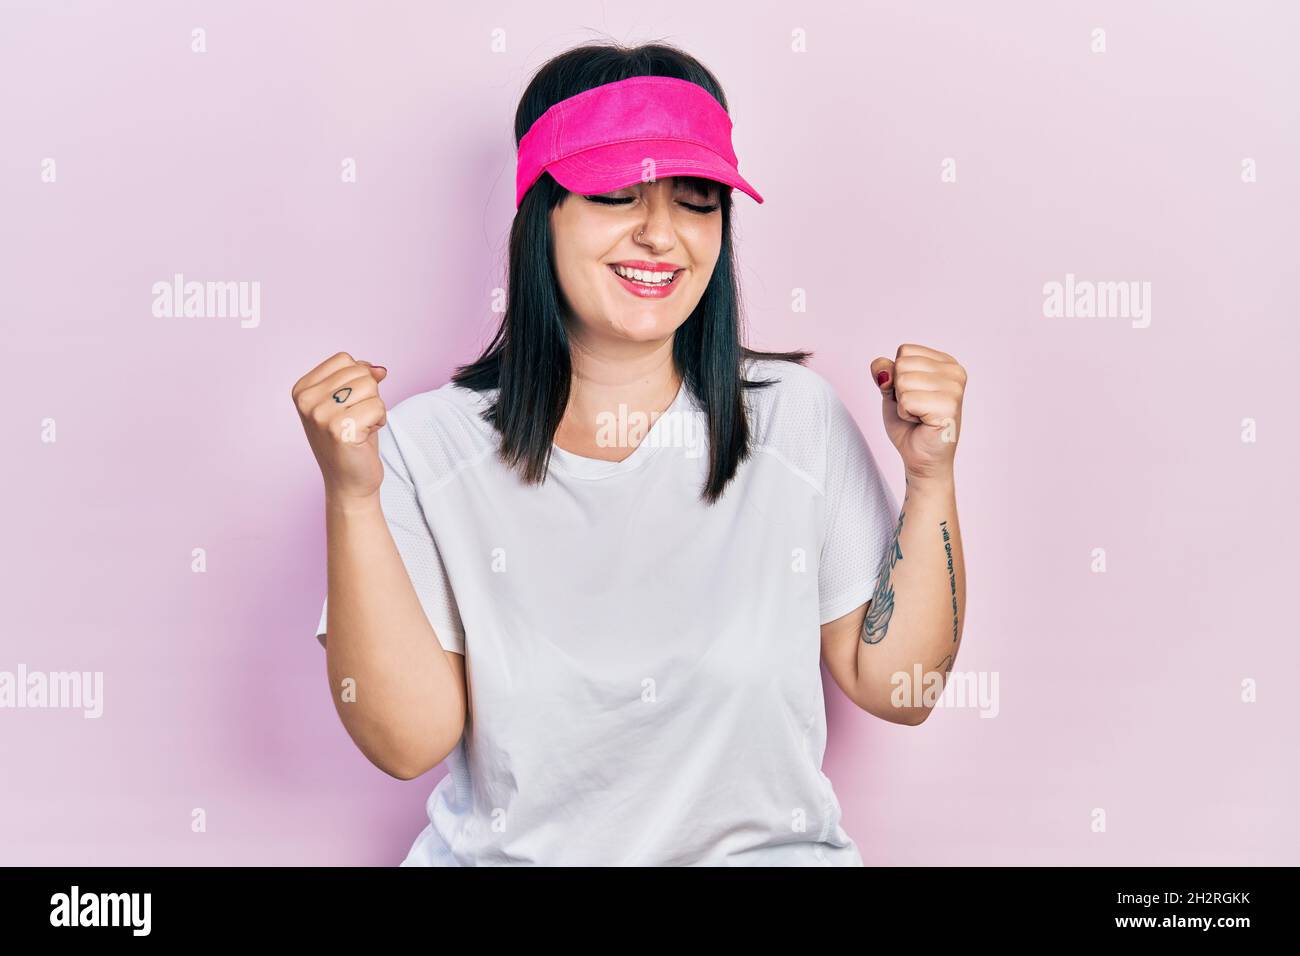 Young hispanic woman wearing sportswear and sun visor cap very happy and excited doing winner gesture with arms raised, smiling and screaming for succ Stock Photo